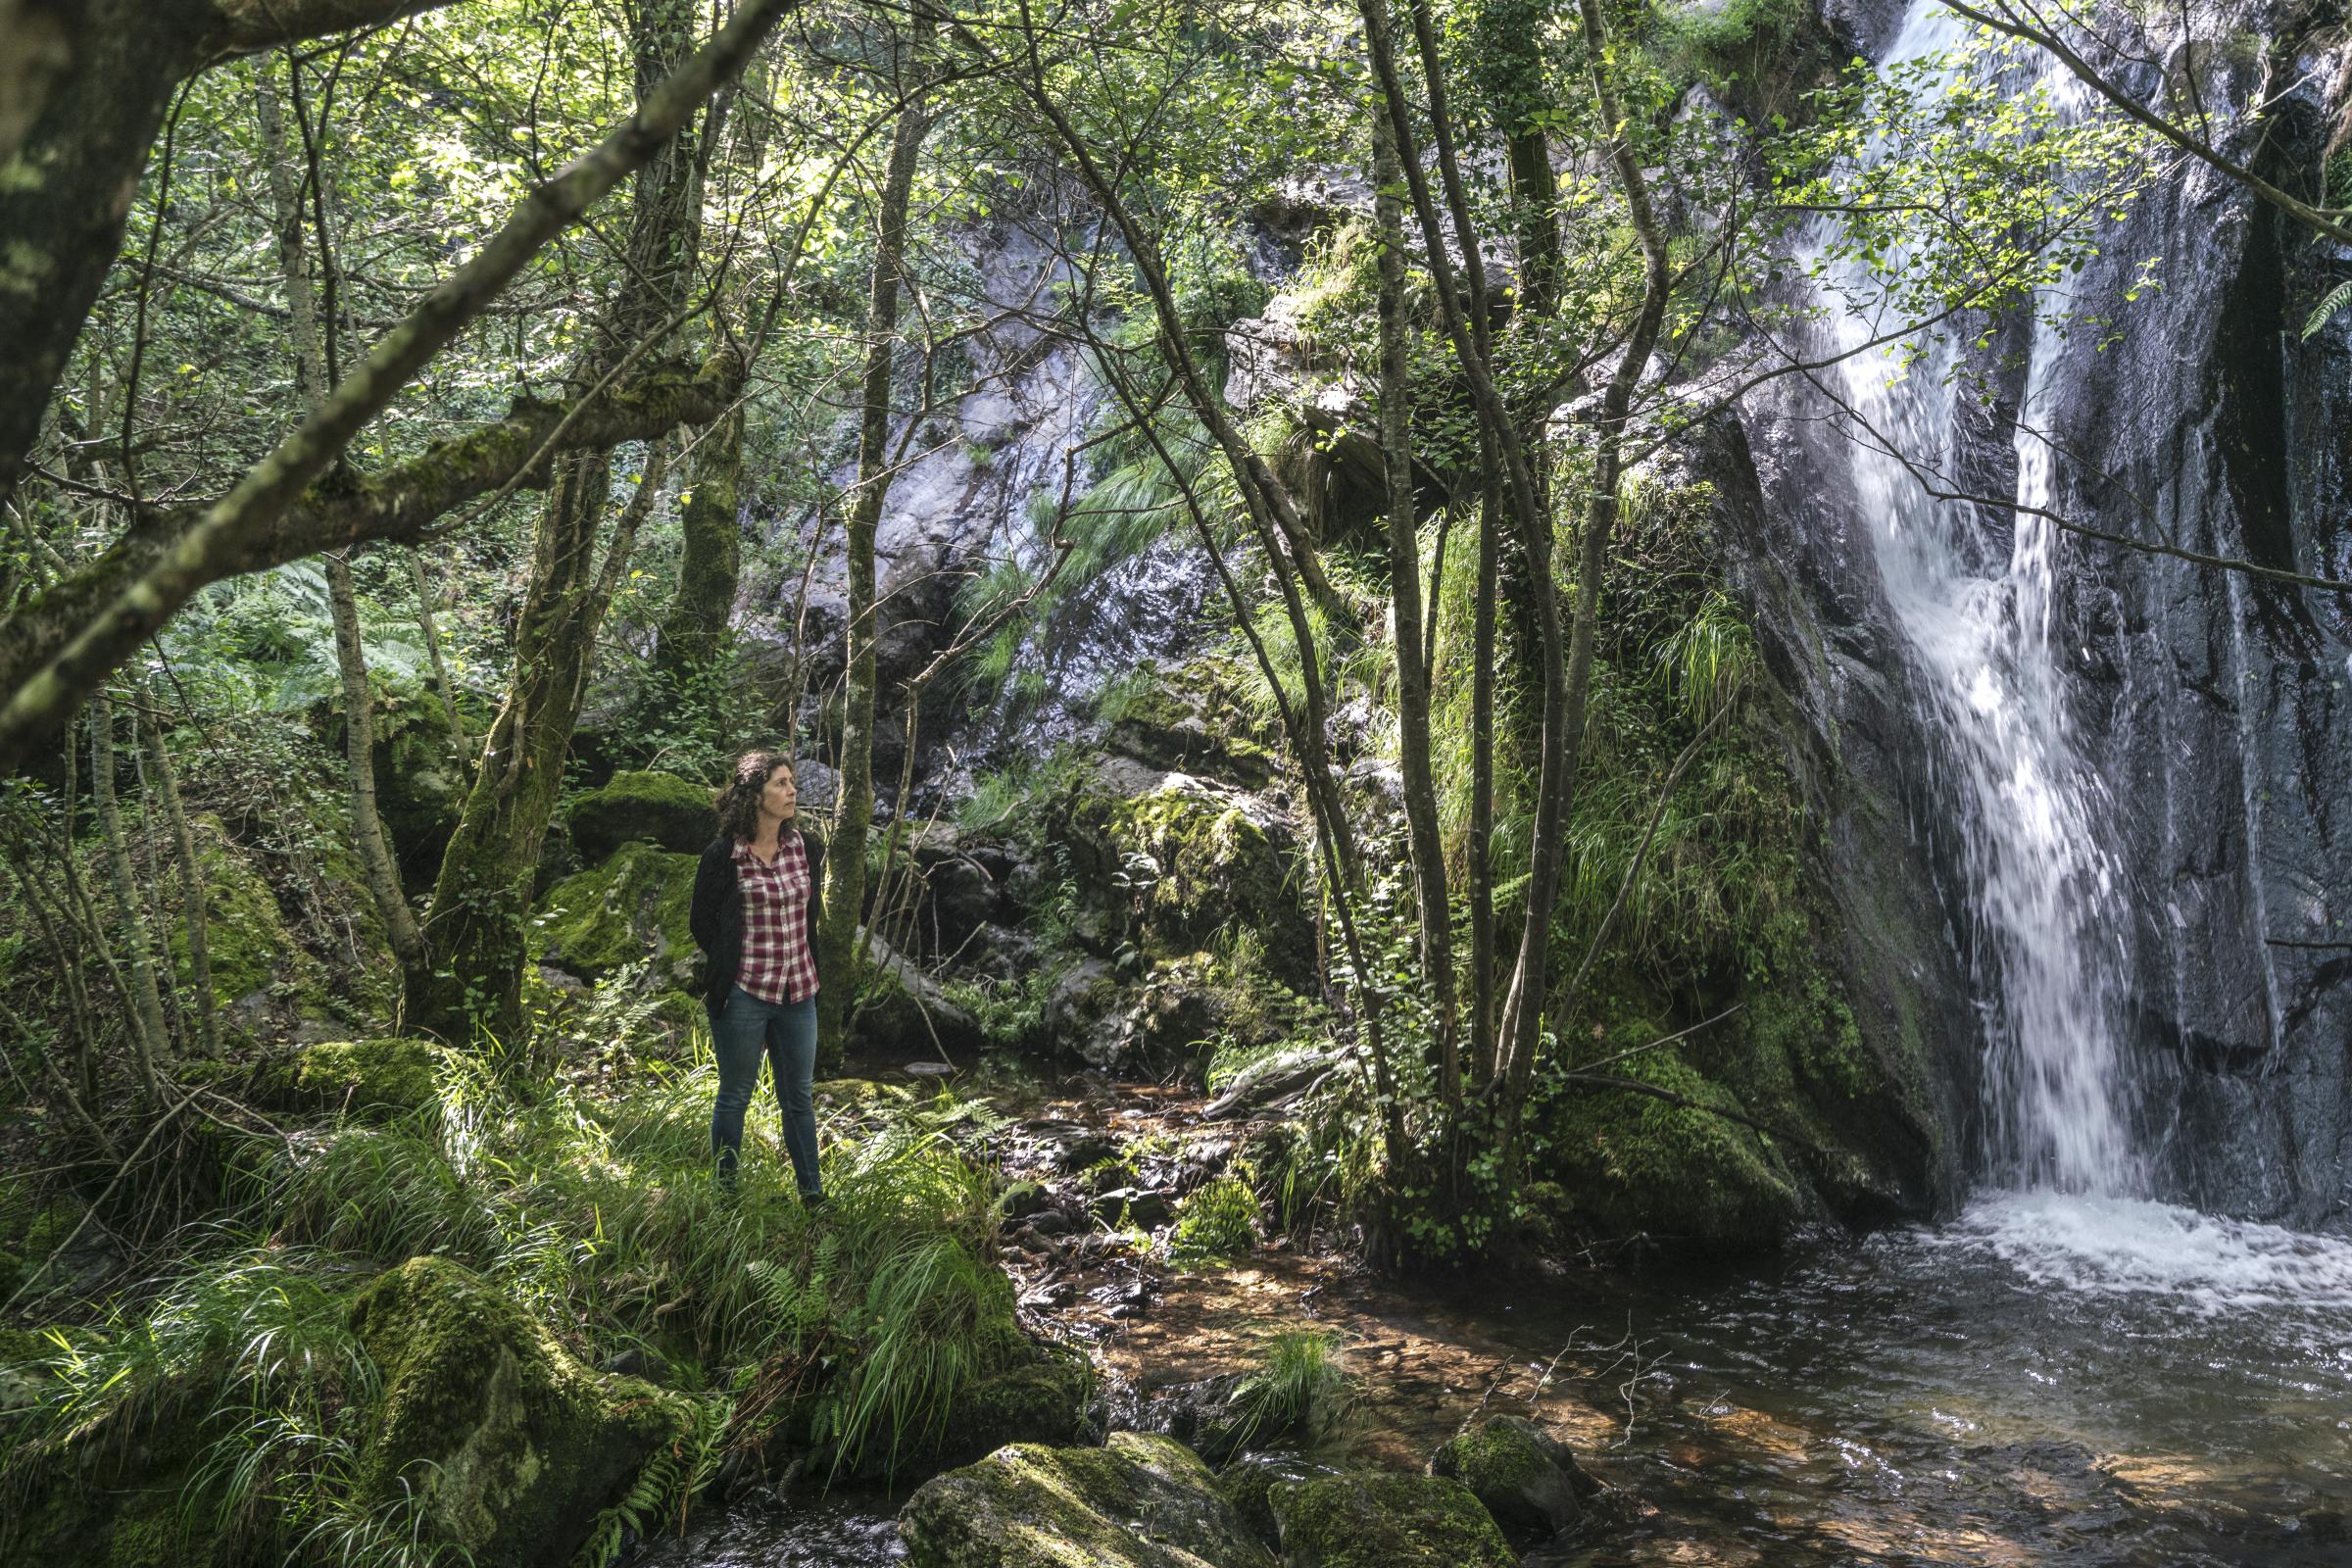 Covas do Barroso, June 22nd, 2021 - Aida Fernandes at a waterfall that lies inside the perimeter of the lithium mine the British company Savannah...